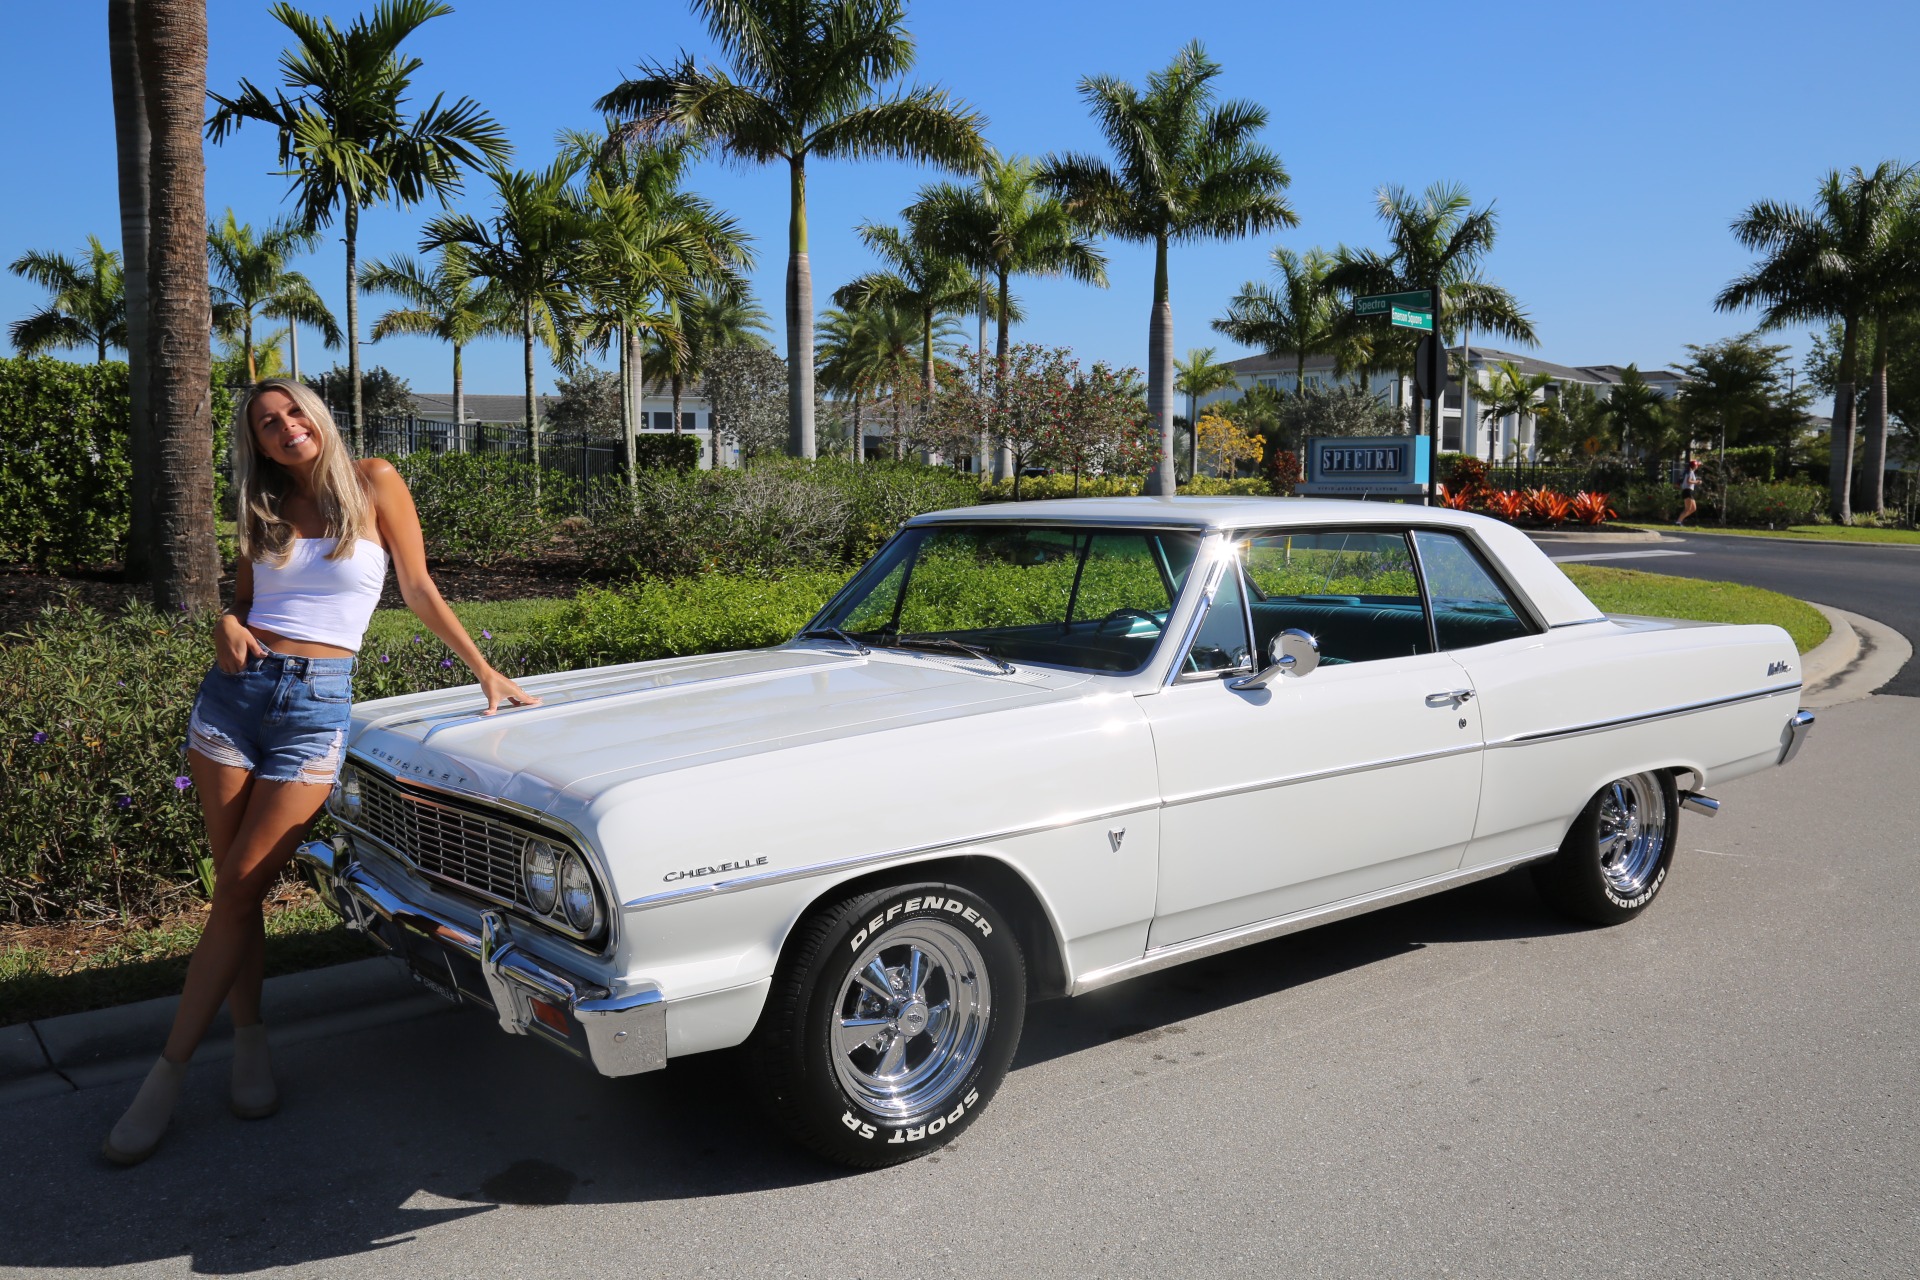 Used 1964 Chevrolet Chevelle Malibu V8 ZZ383 Engine  5 speed Manual Tremic for sale Sold at Muscle Cars for Sale Inc. in Fort Myers FL 33912 1